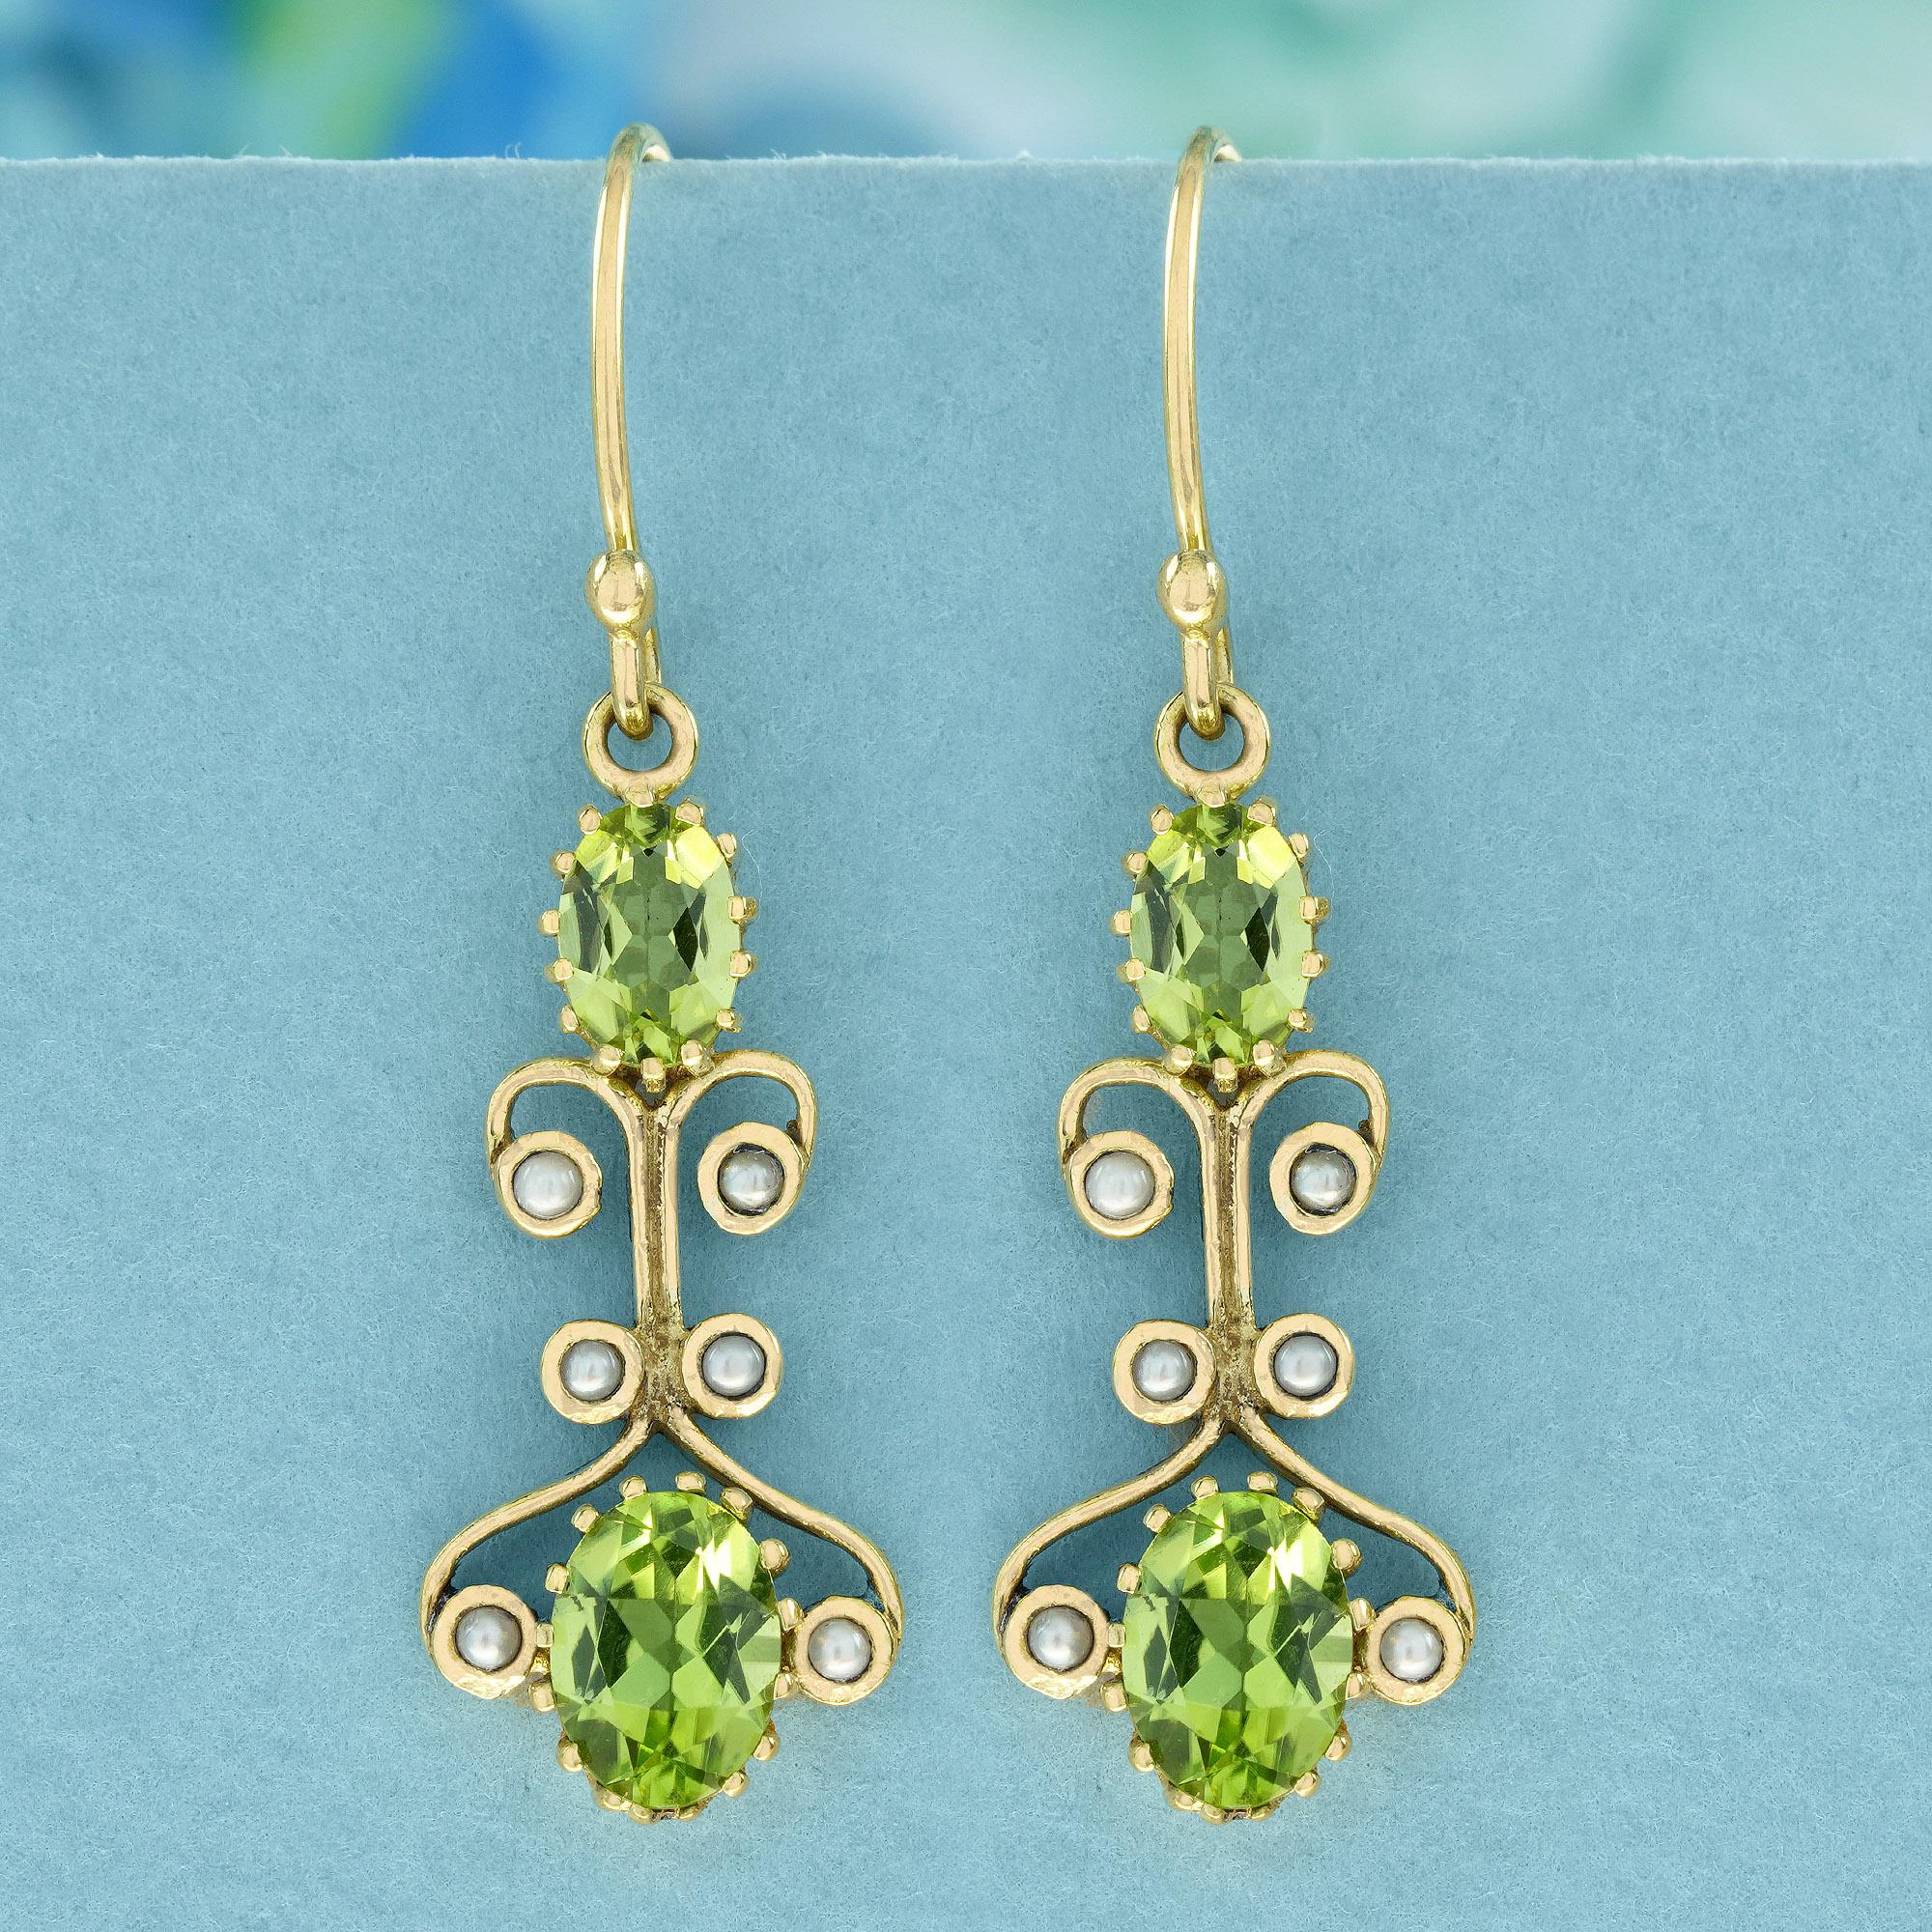 Experience timeless elegance with these captivating vintage-inspired earrings. The dangle showcases a delicate yellow gold design, featuring oval lime green peridot gemstones at both the top and bottom centers. Gracefully nestled between these